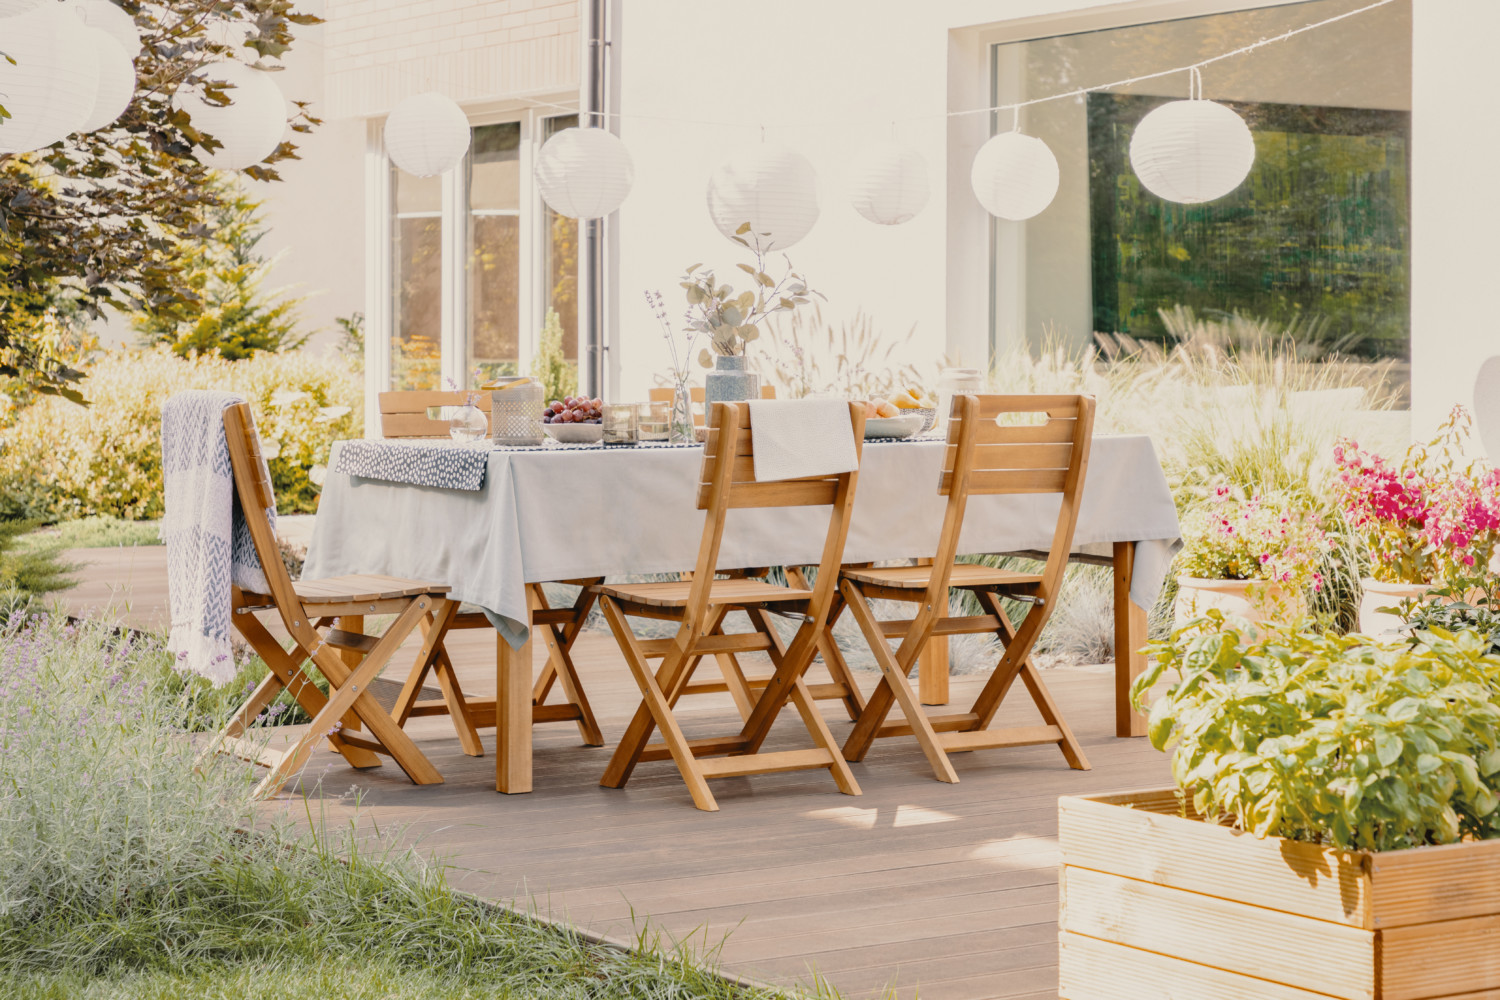 Outdoor dining room with wooden garden furniture set with table